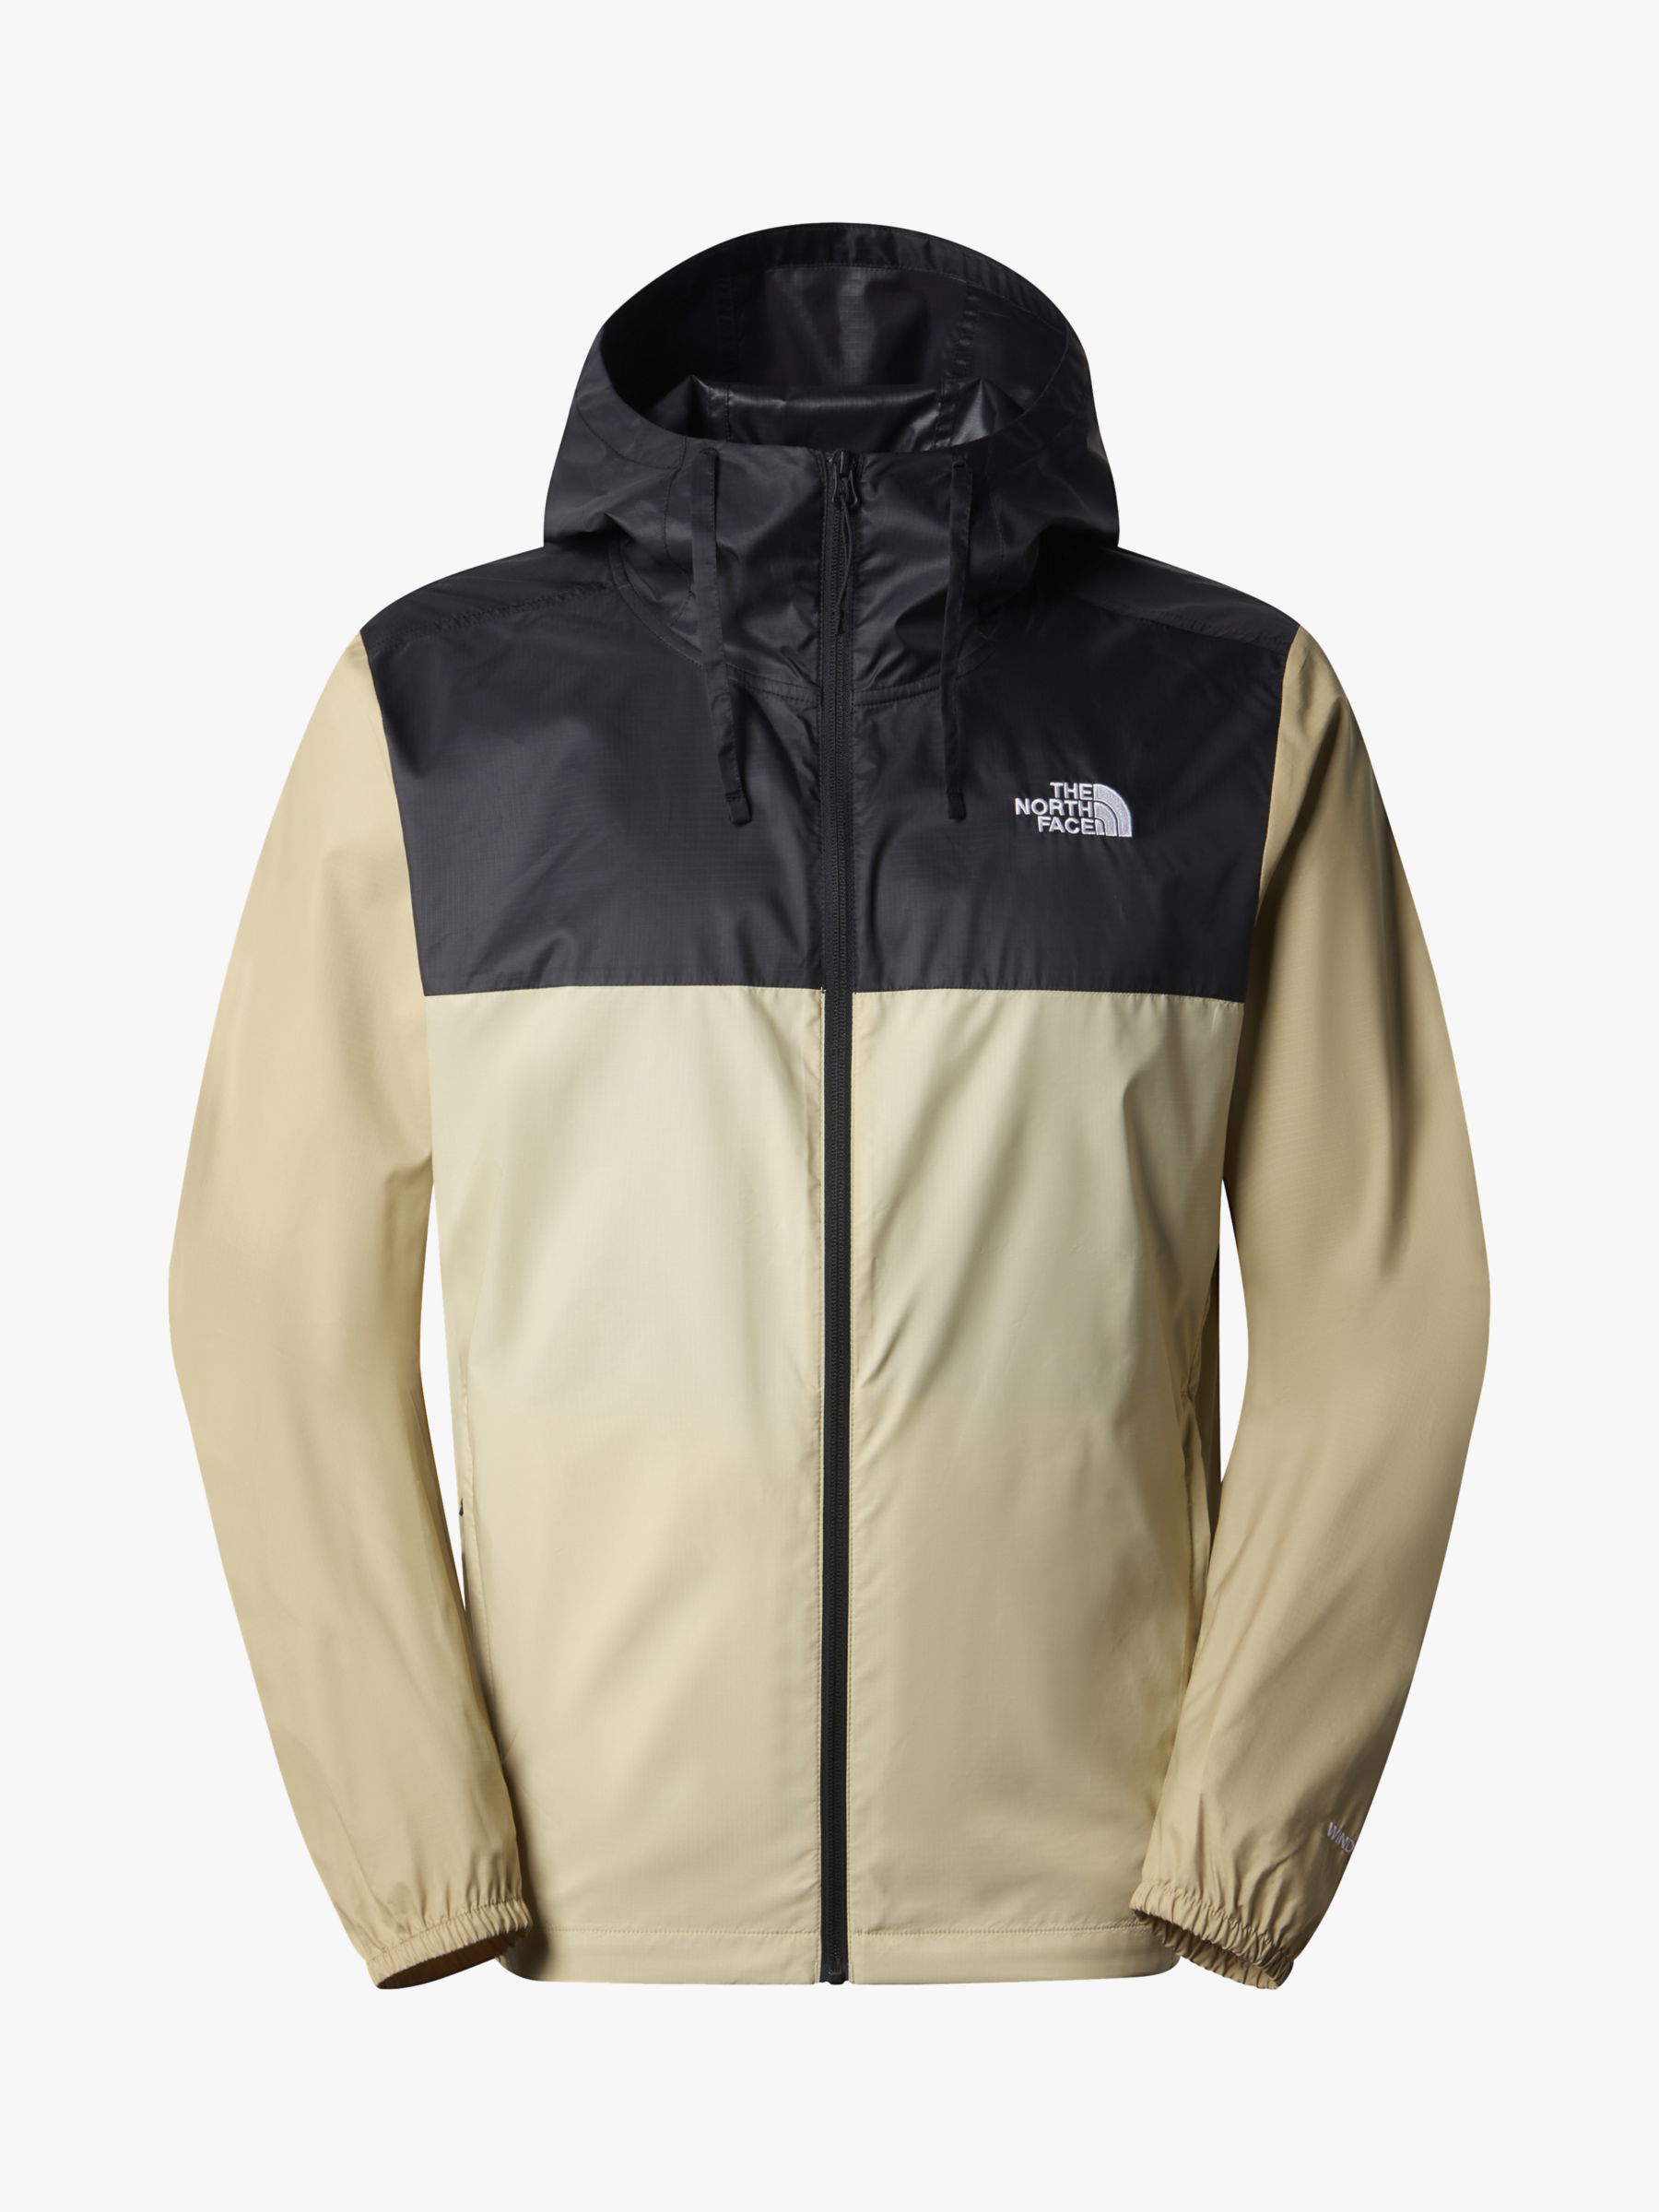 The North Face Men's Cyclone III Jacket, Gravel/Stone, XL